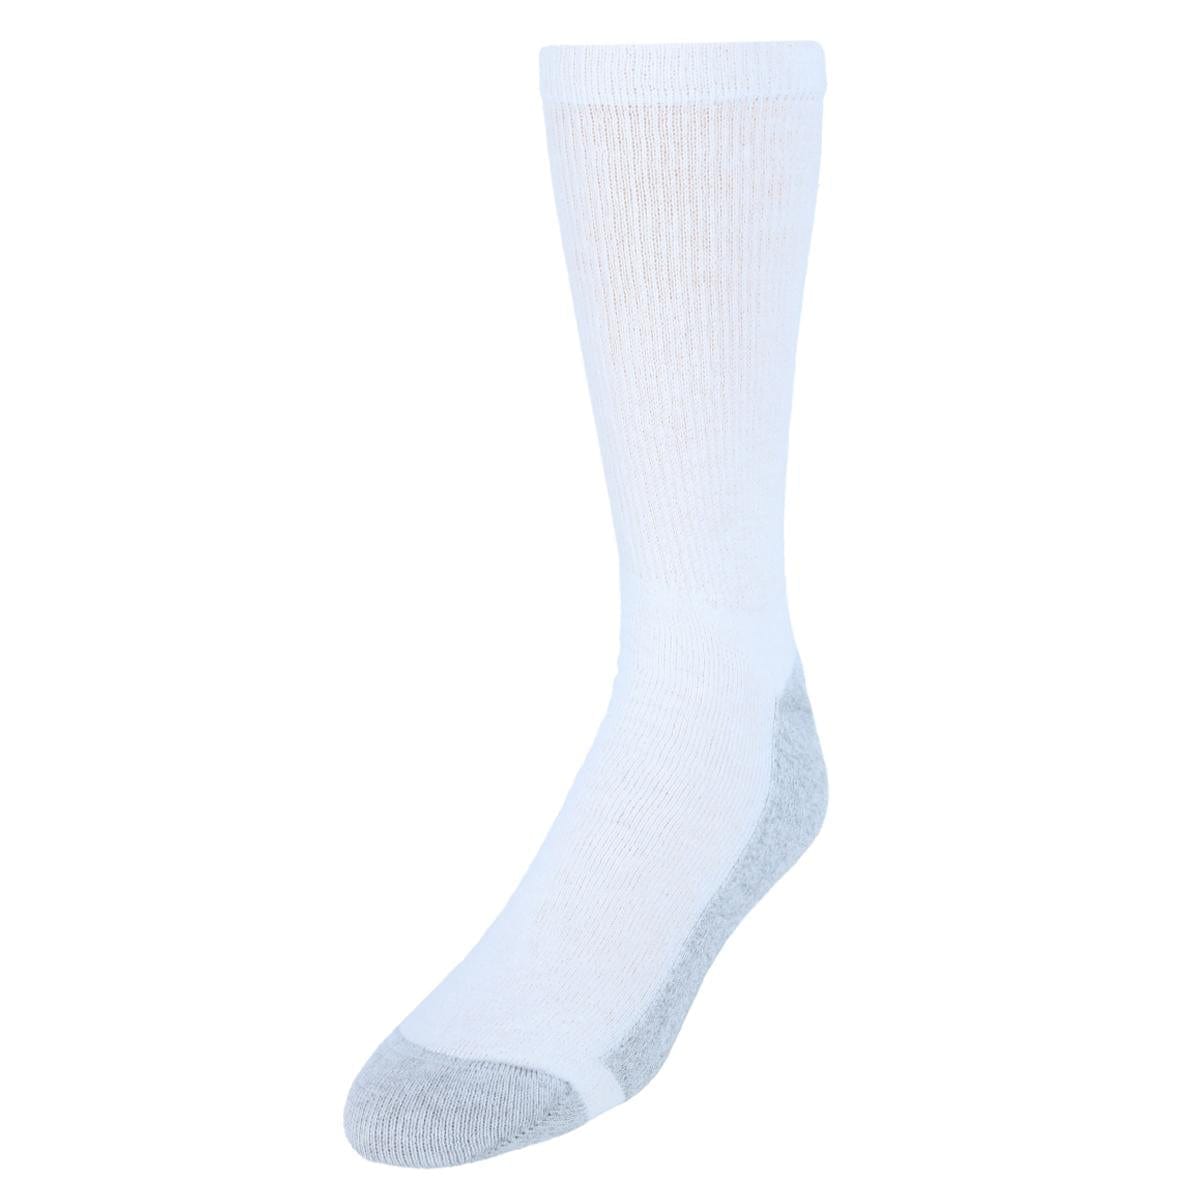 Men's Big and Tall Crew Socks (12 Pack) by Hanes | Big and Tall Socks ...